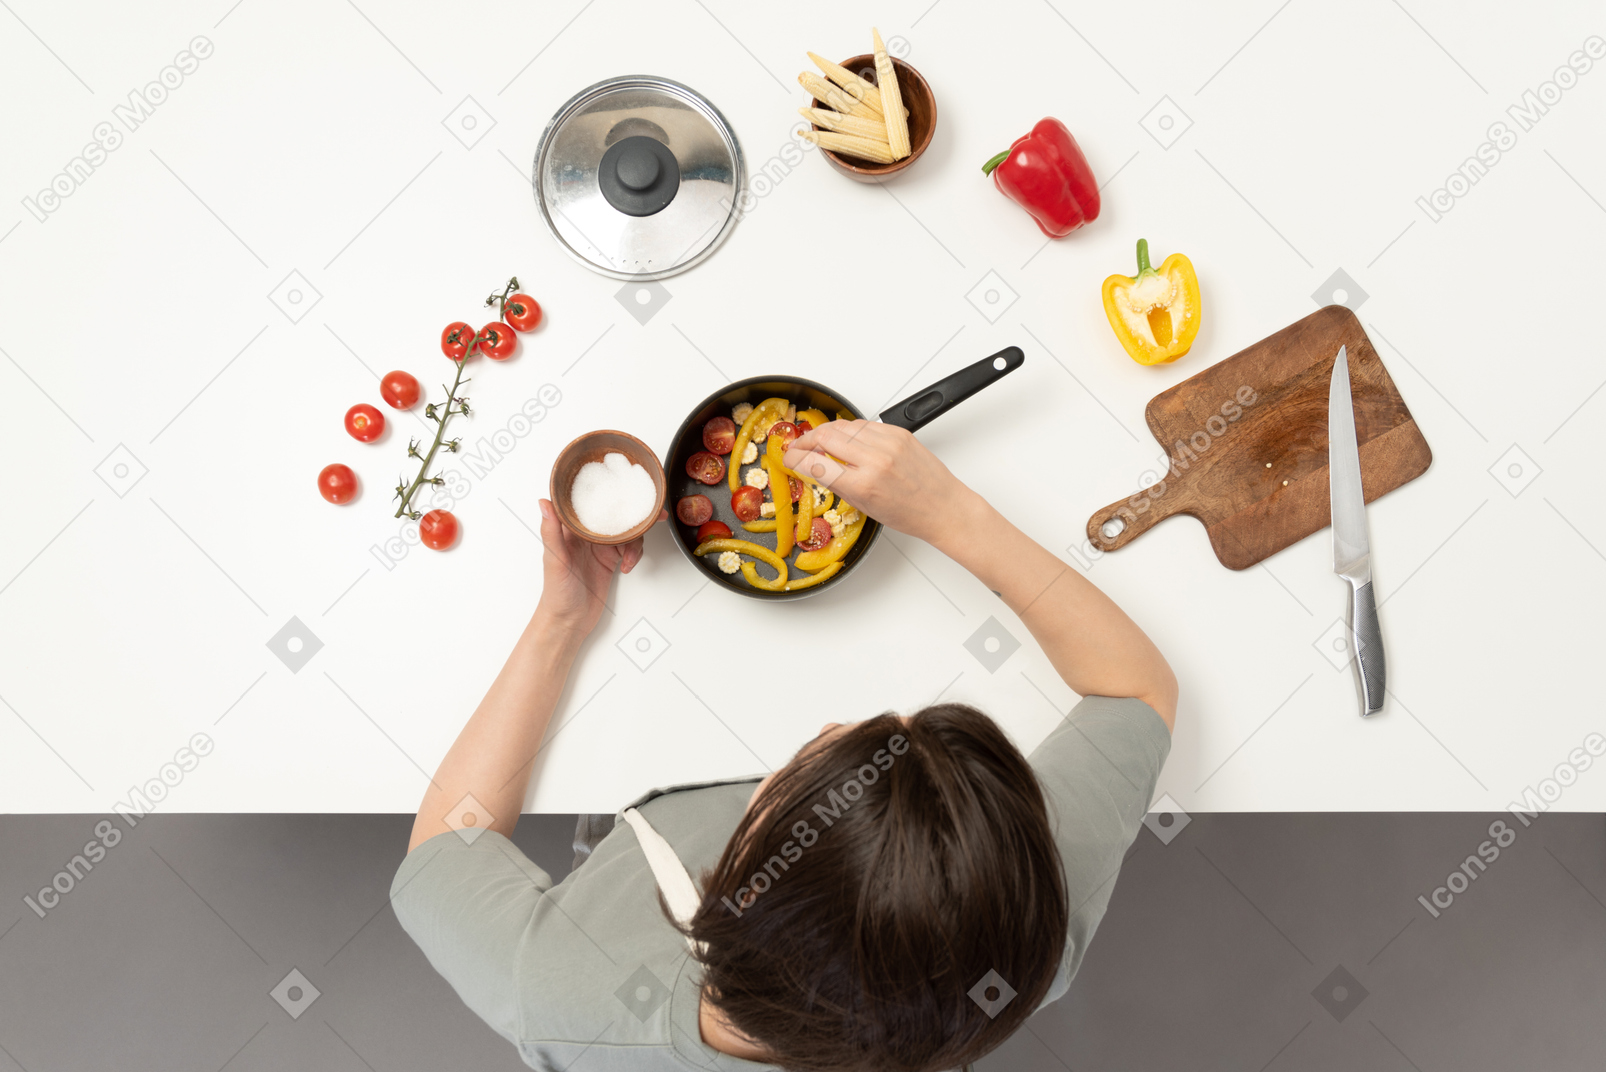 A young woman adding salt to vegetables